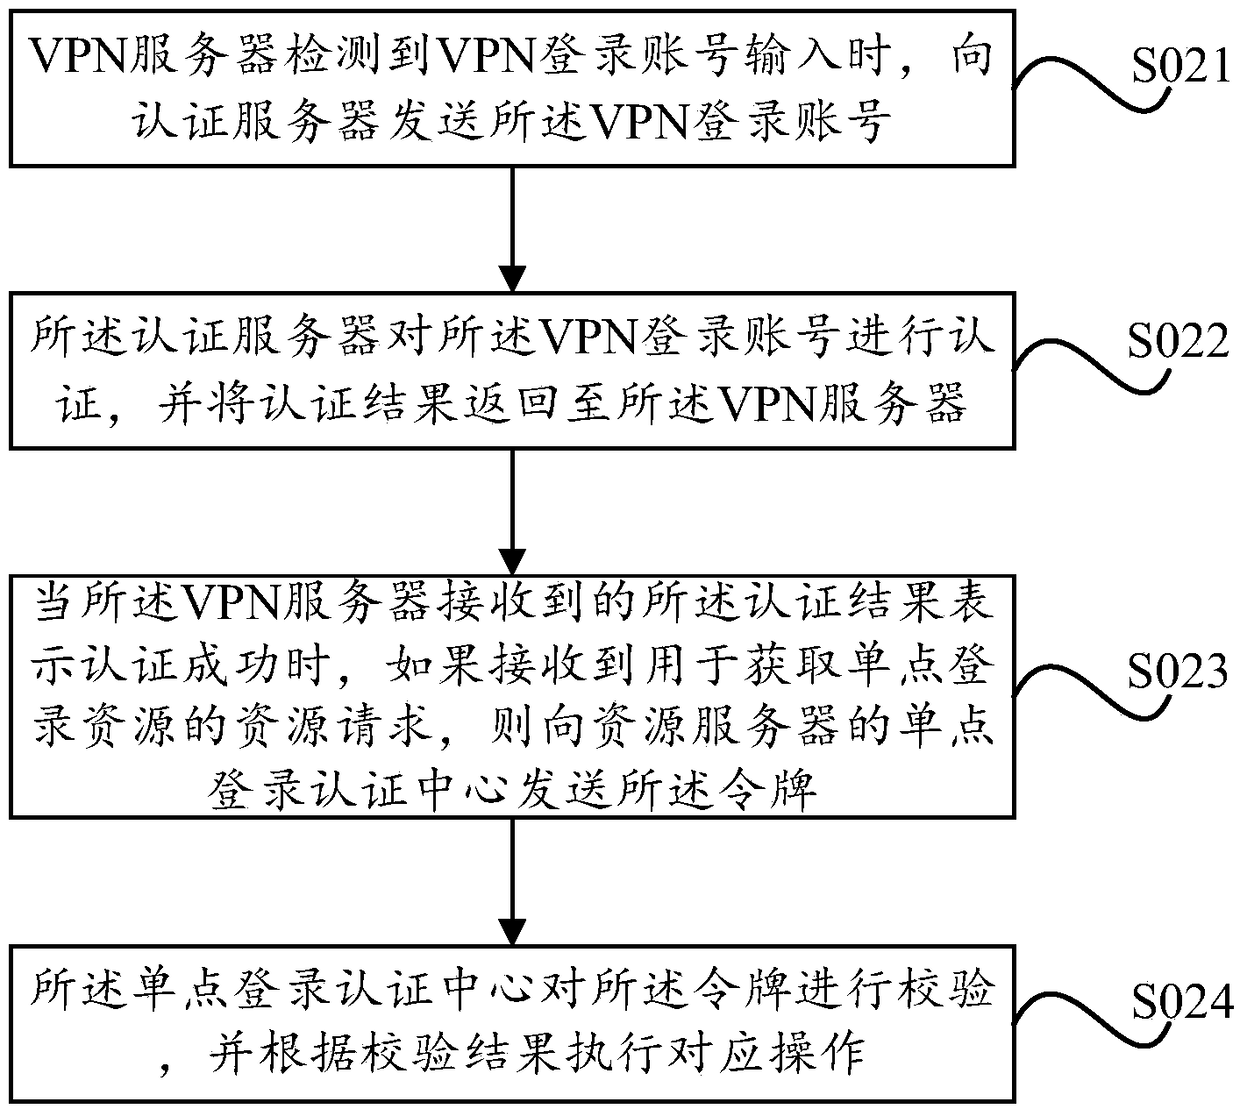 Single sign on methods and devices based on virtual private network (VPN)